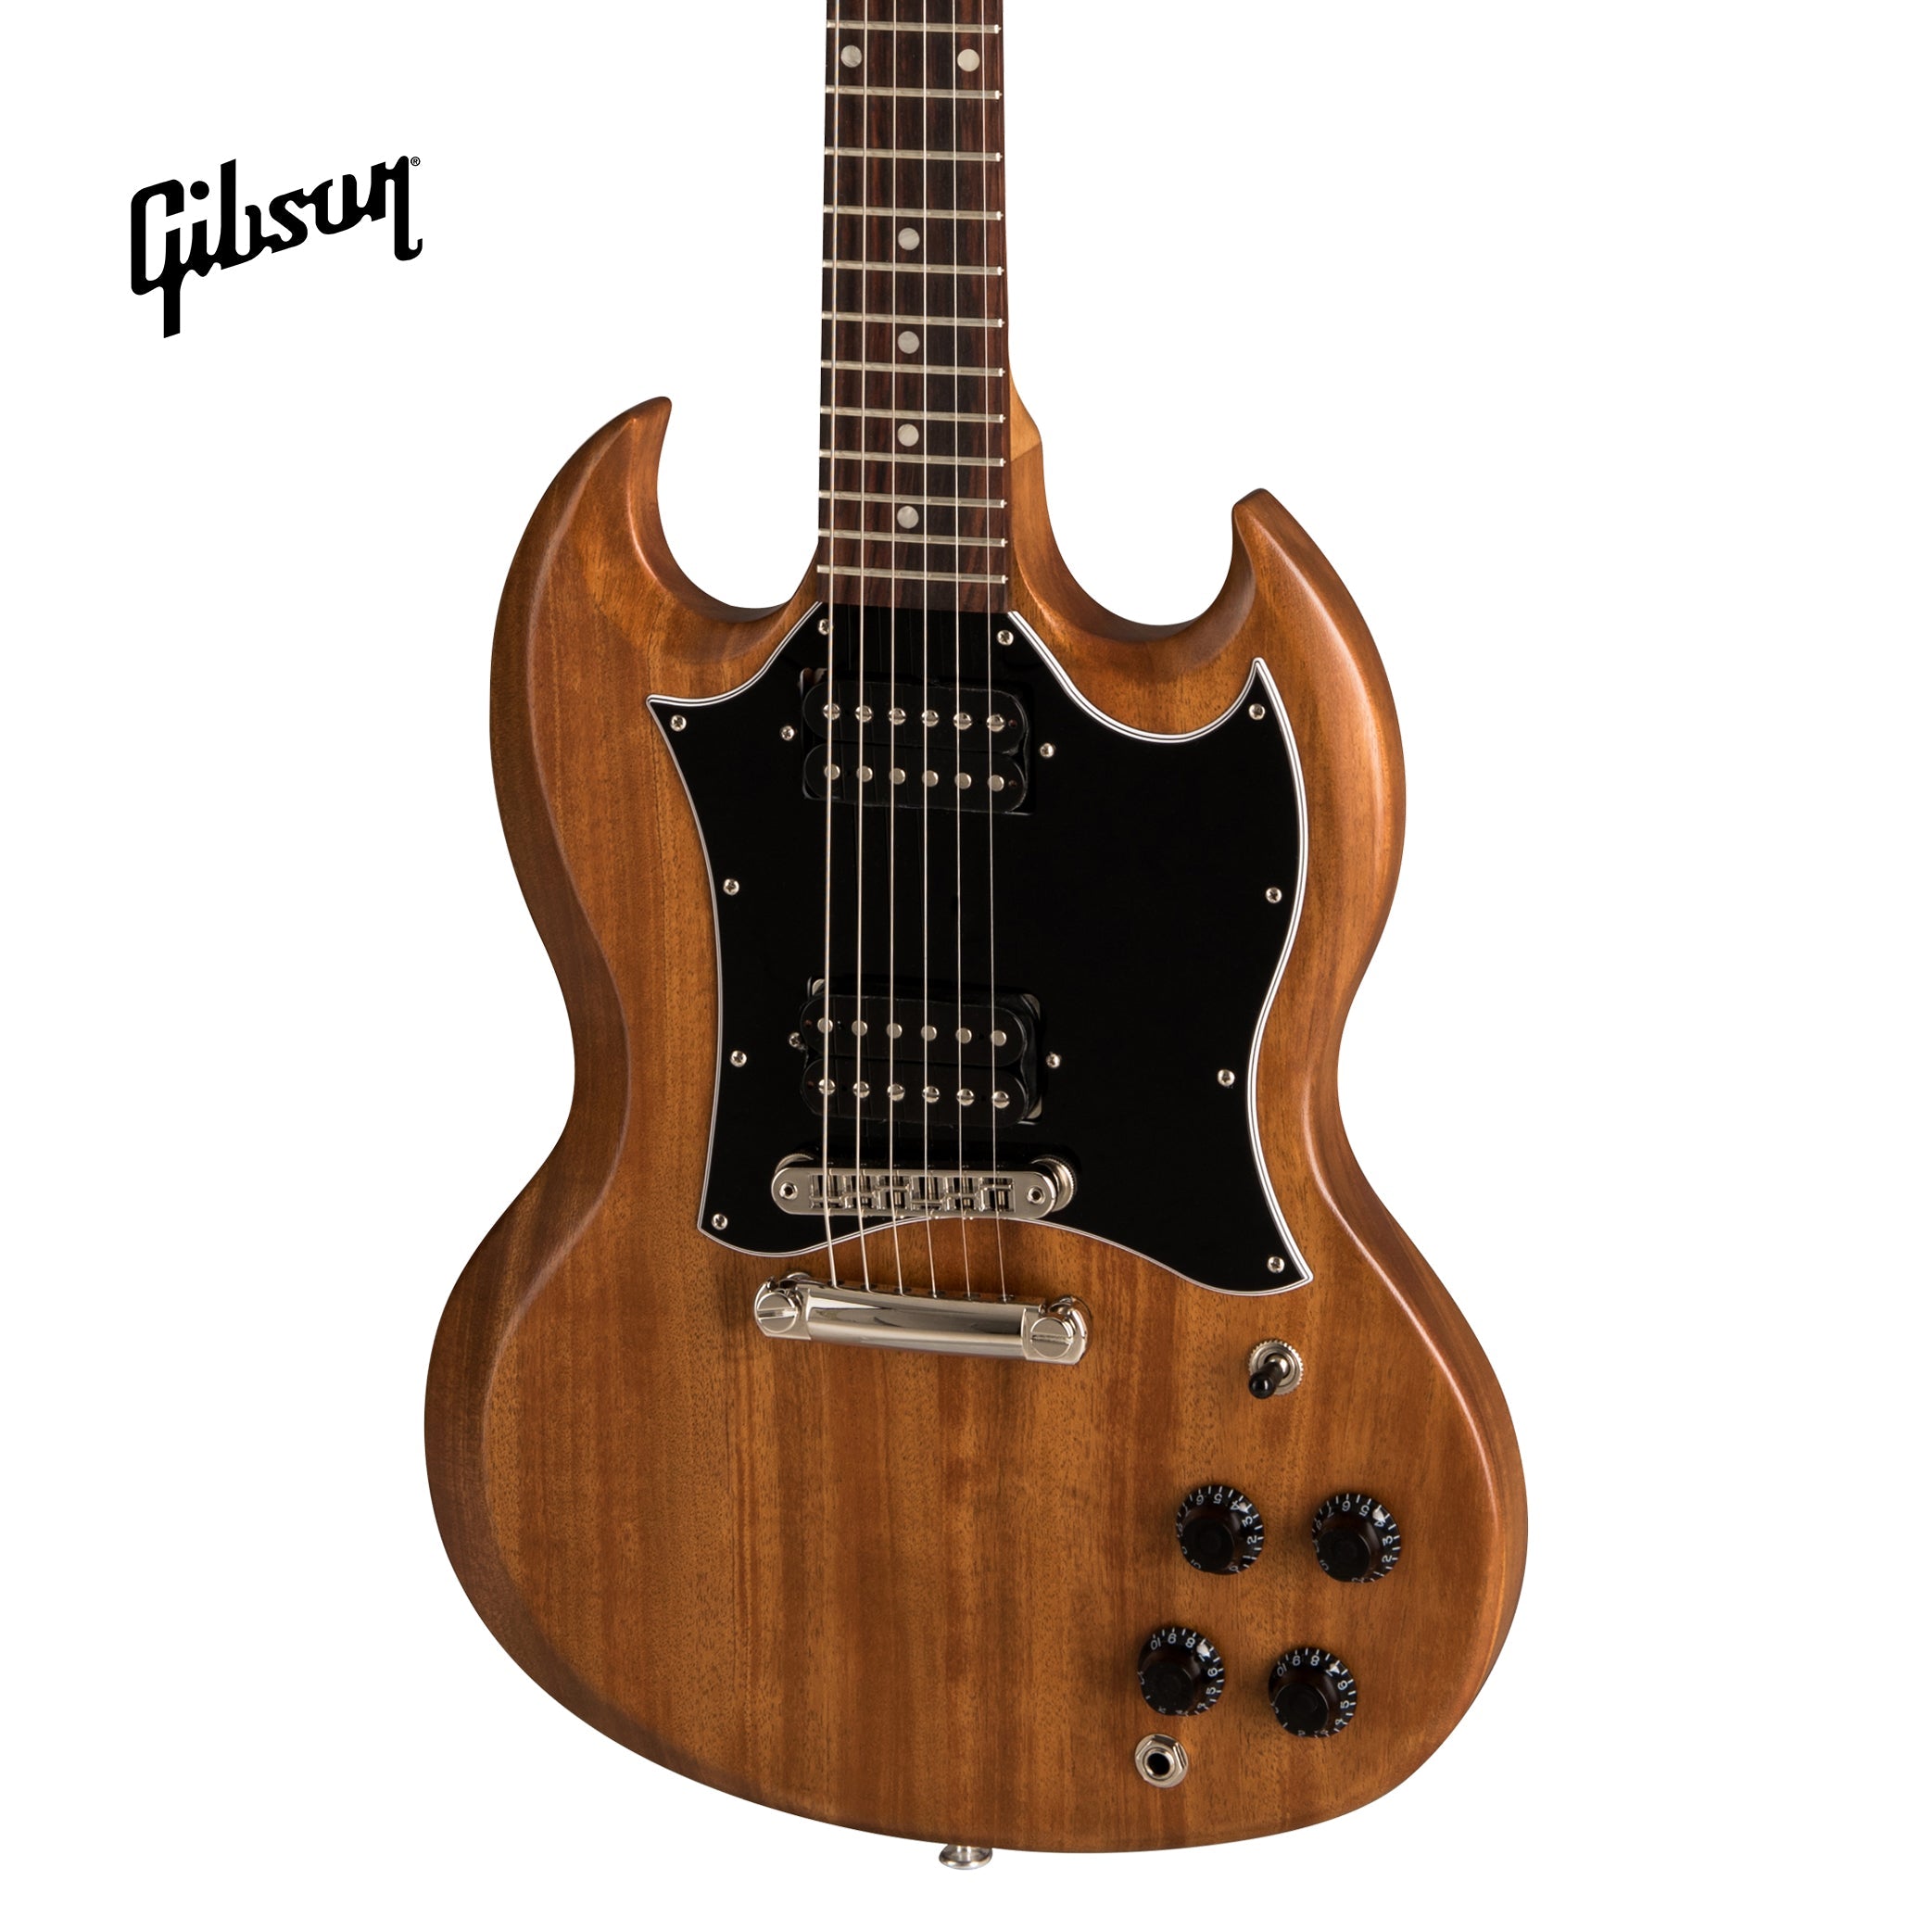 GIBSON SG TRIBUTE ELECTRIC GUITAR - NATURAL WALNUT